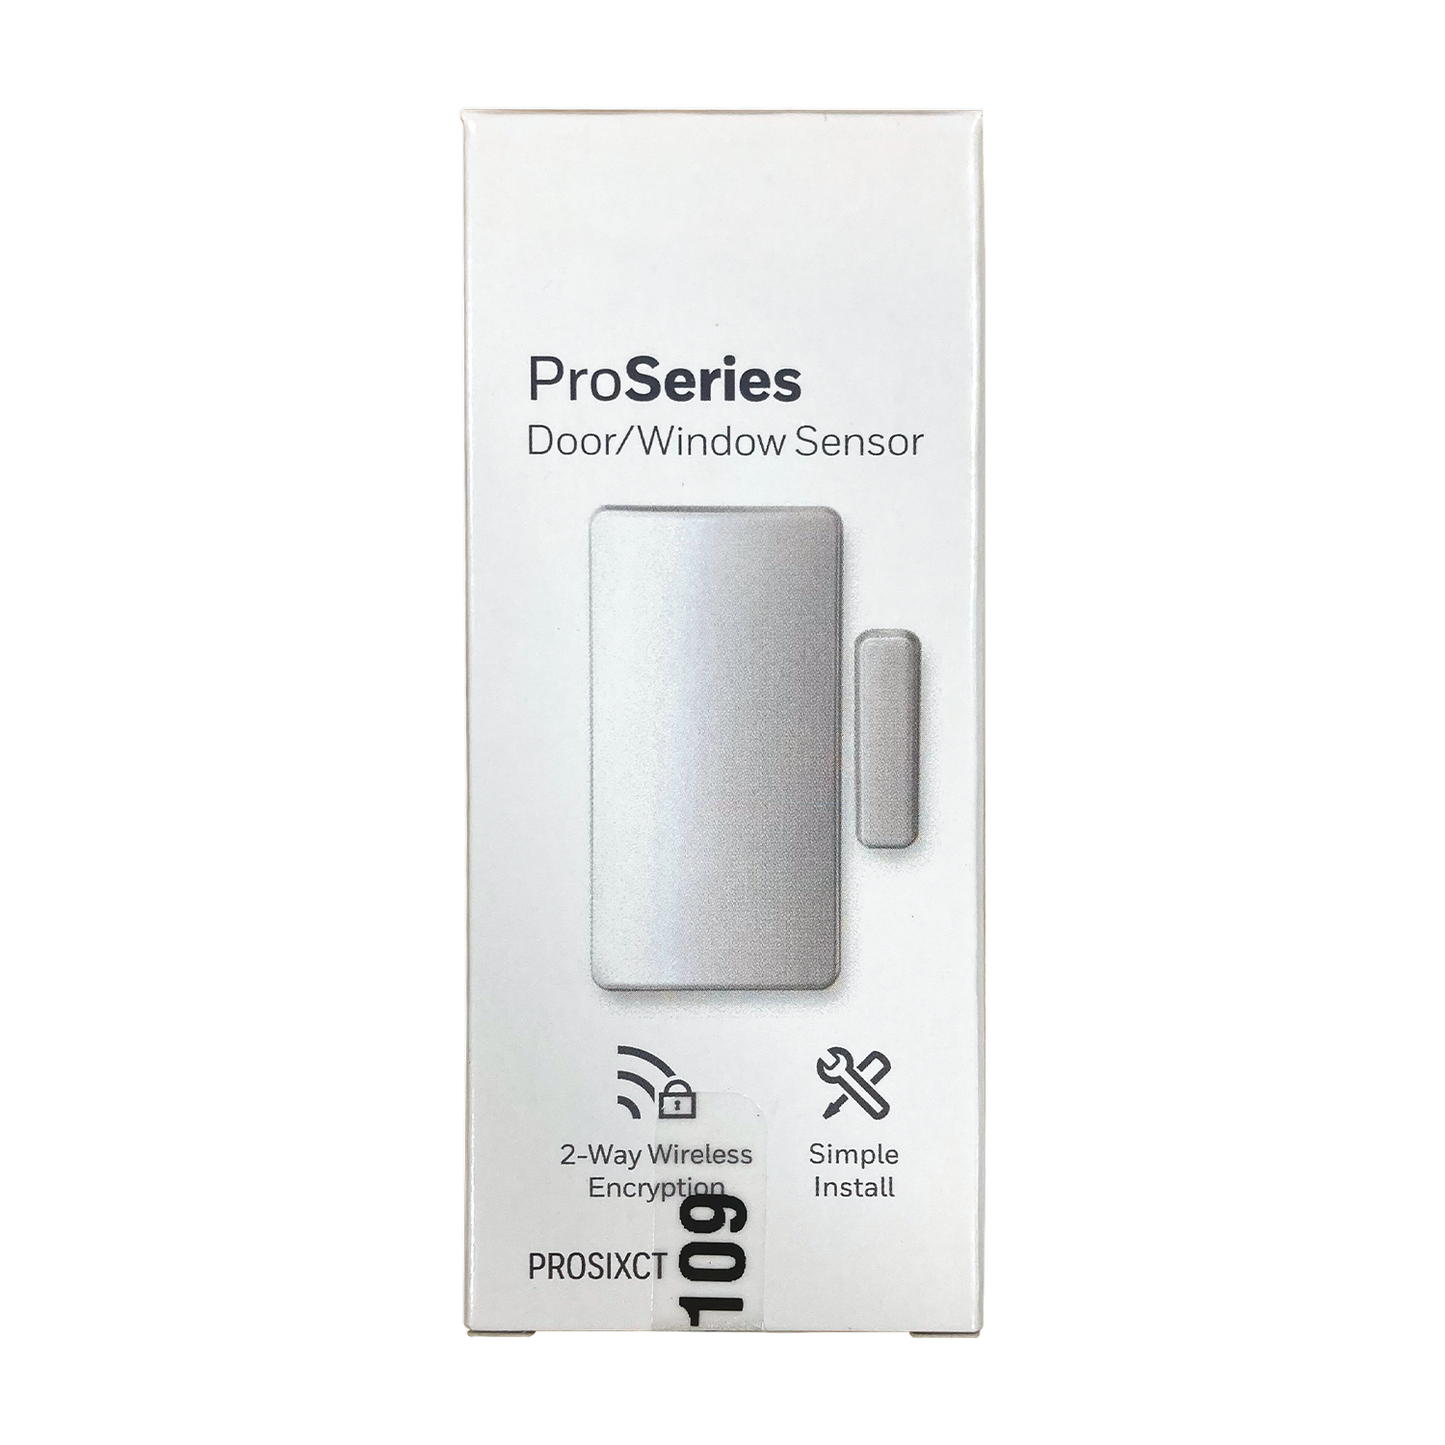 With a range up to 300 feet and 128-bit AES encryption, the Two-Way Mini Wireless Window and Door Sensor provides a high level of security to the furthest areas of your customers' businesses and now comes in a mini size for easier installation.  Suggested for Skill Games